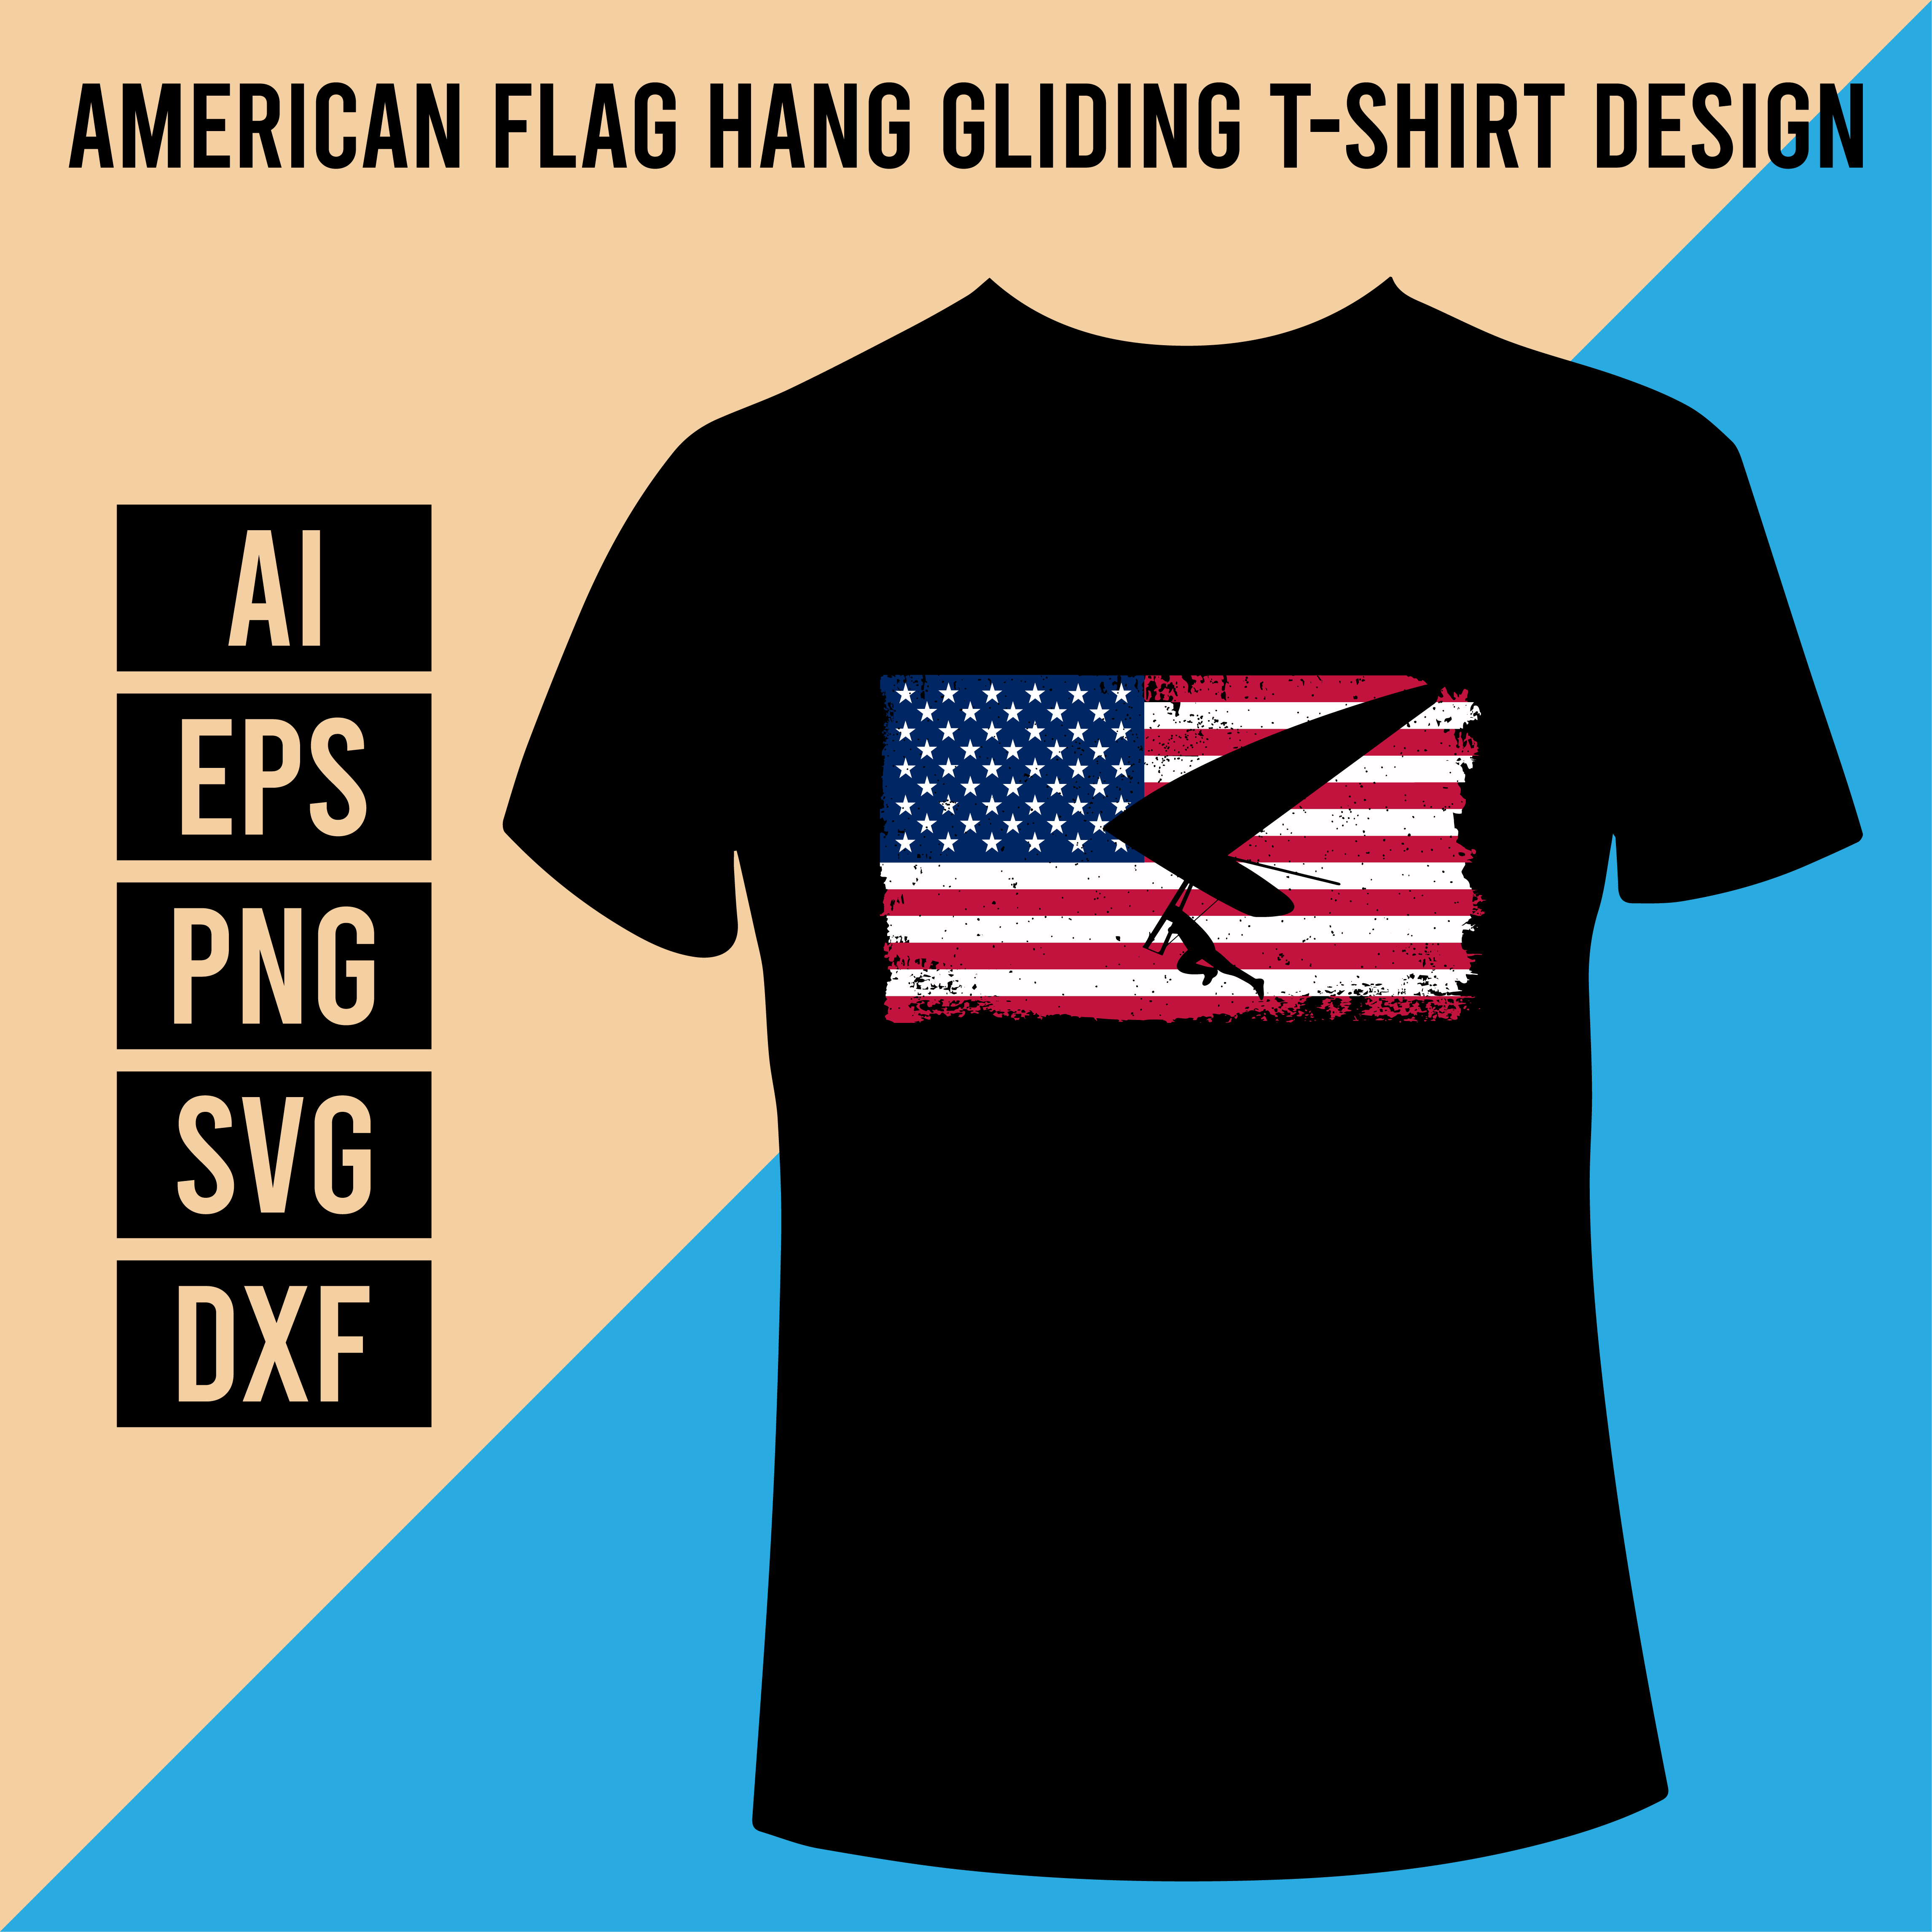 Black shirt with an american flag and a bird on it.